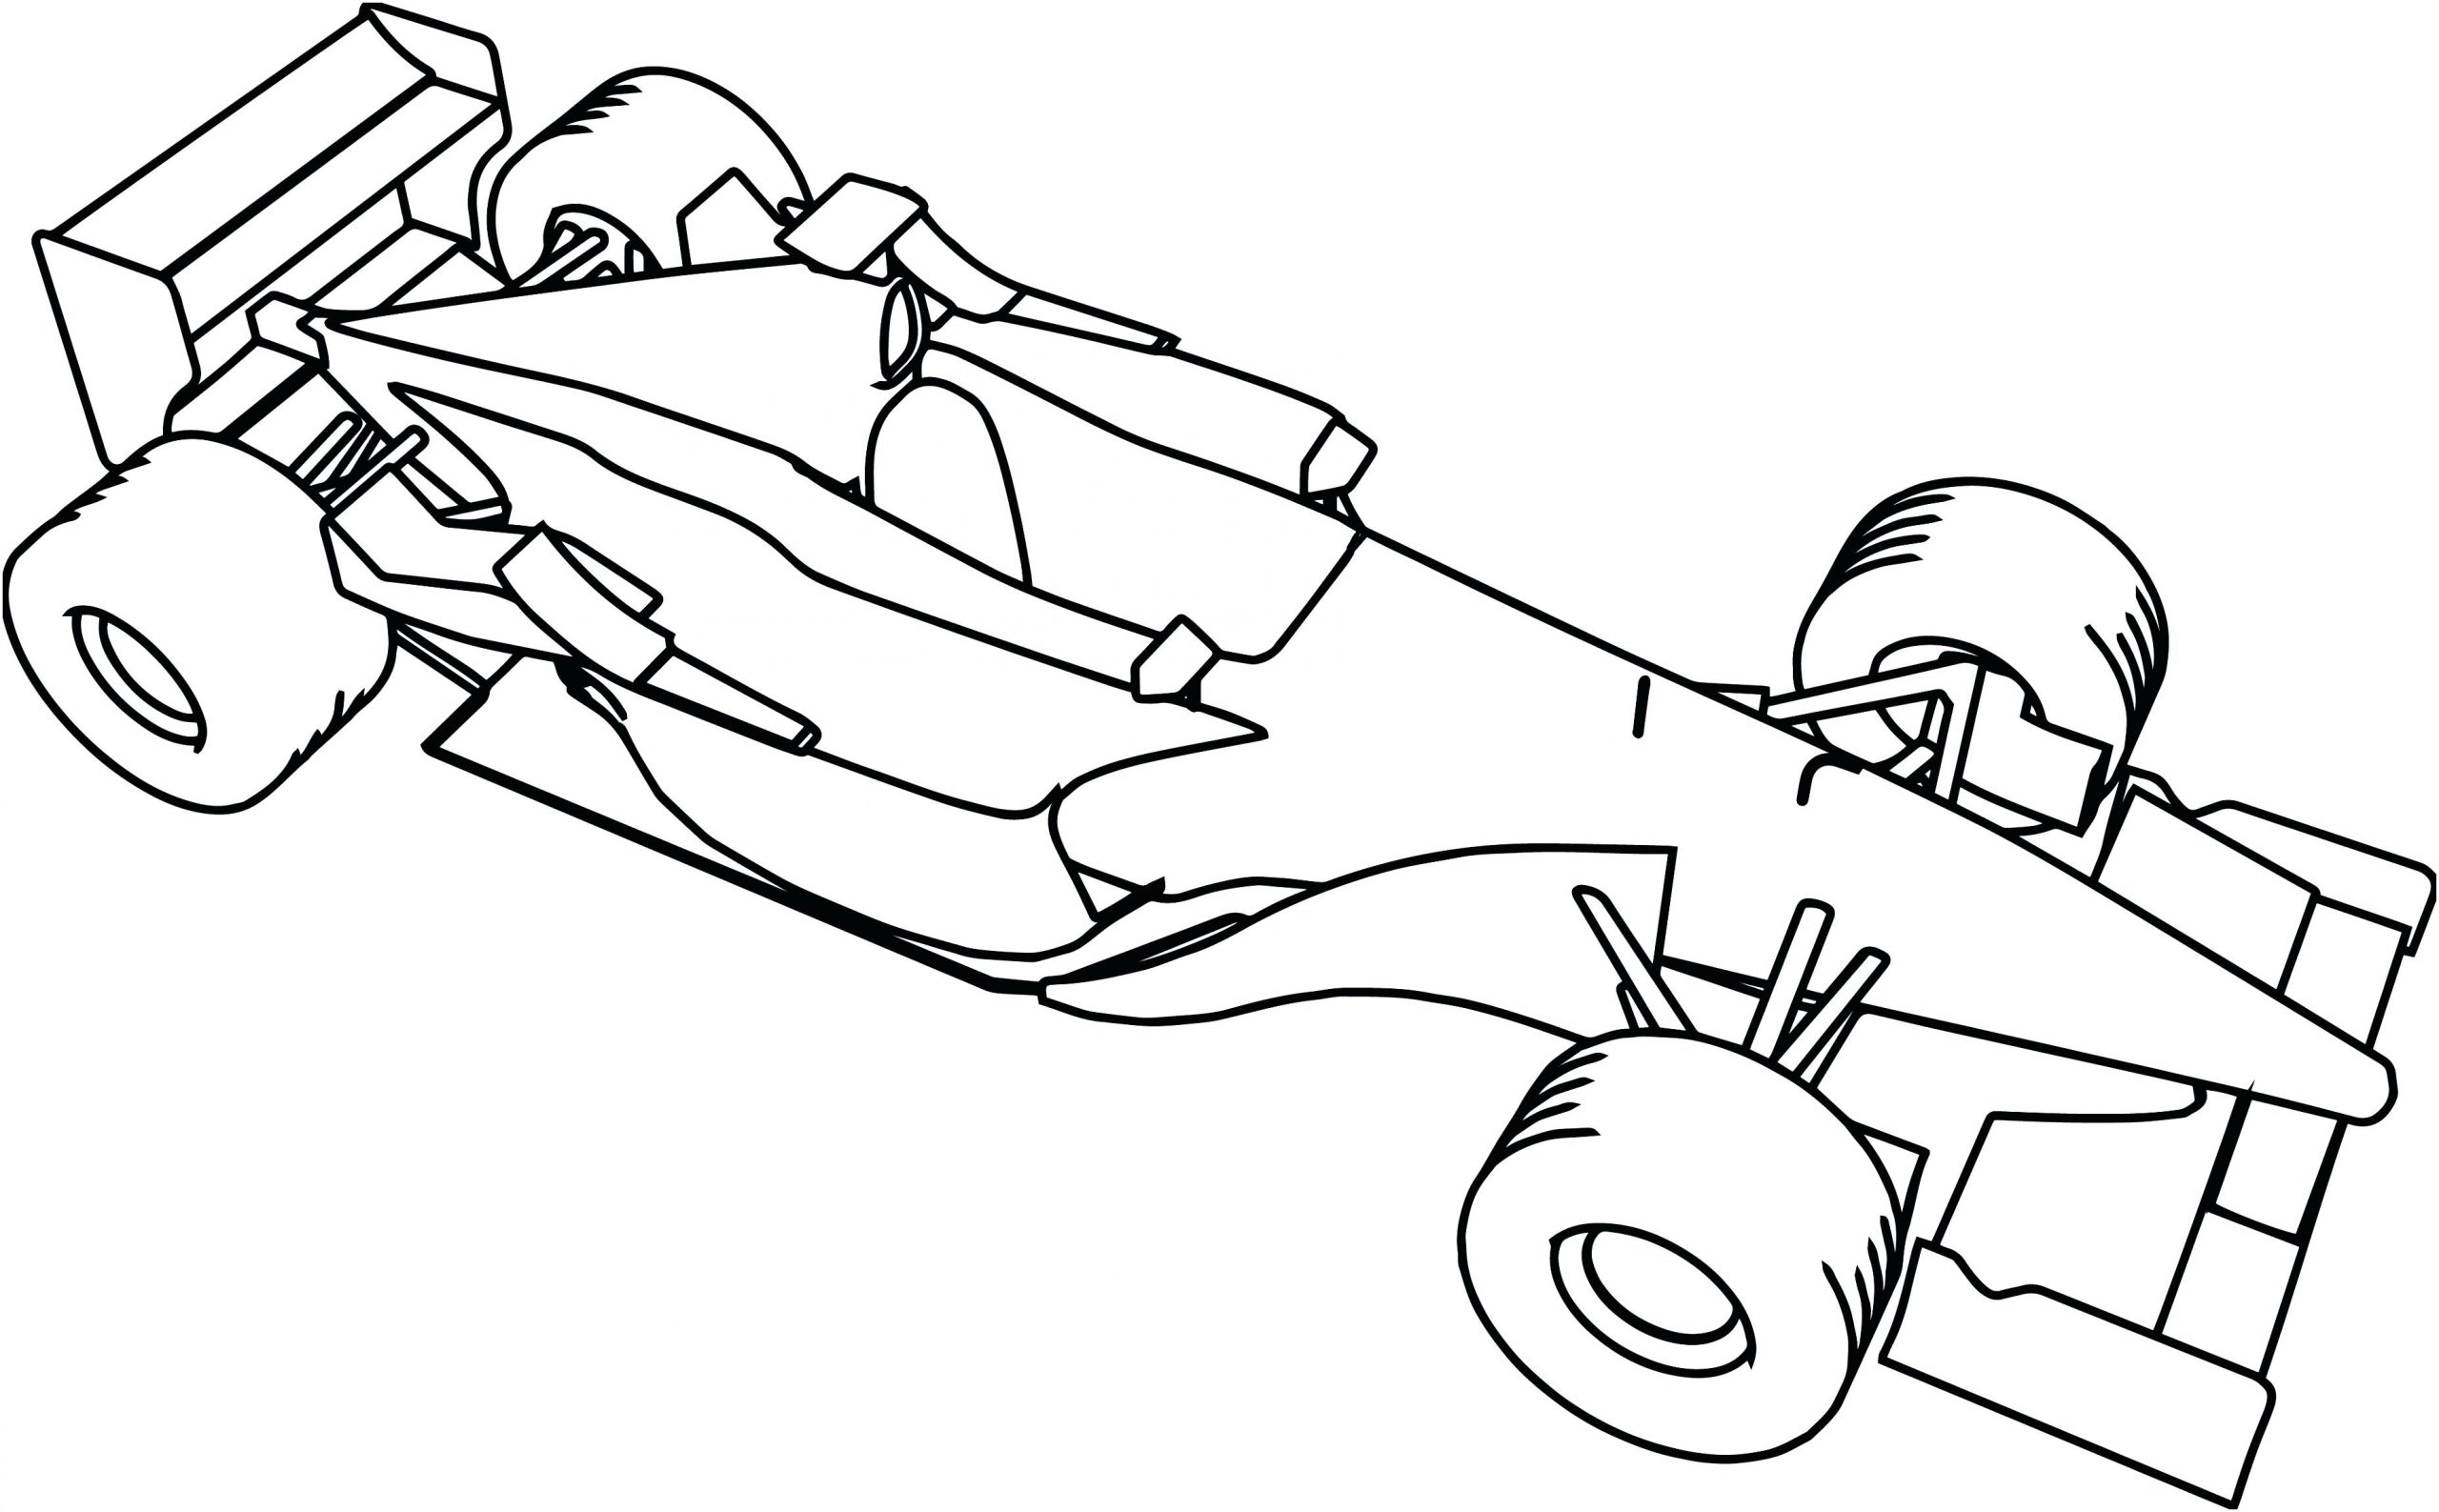 F1 Car Coloring Pages At Getcolorings | Free Printable tout Coloriage Formule 1